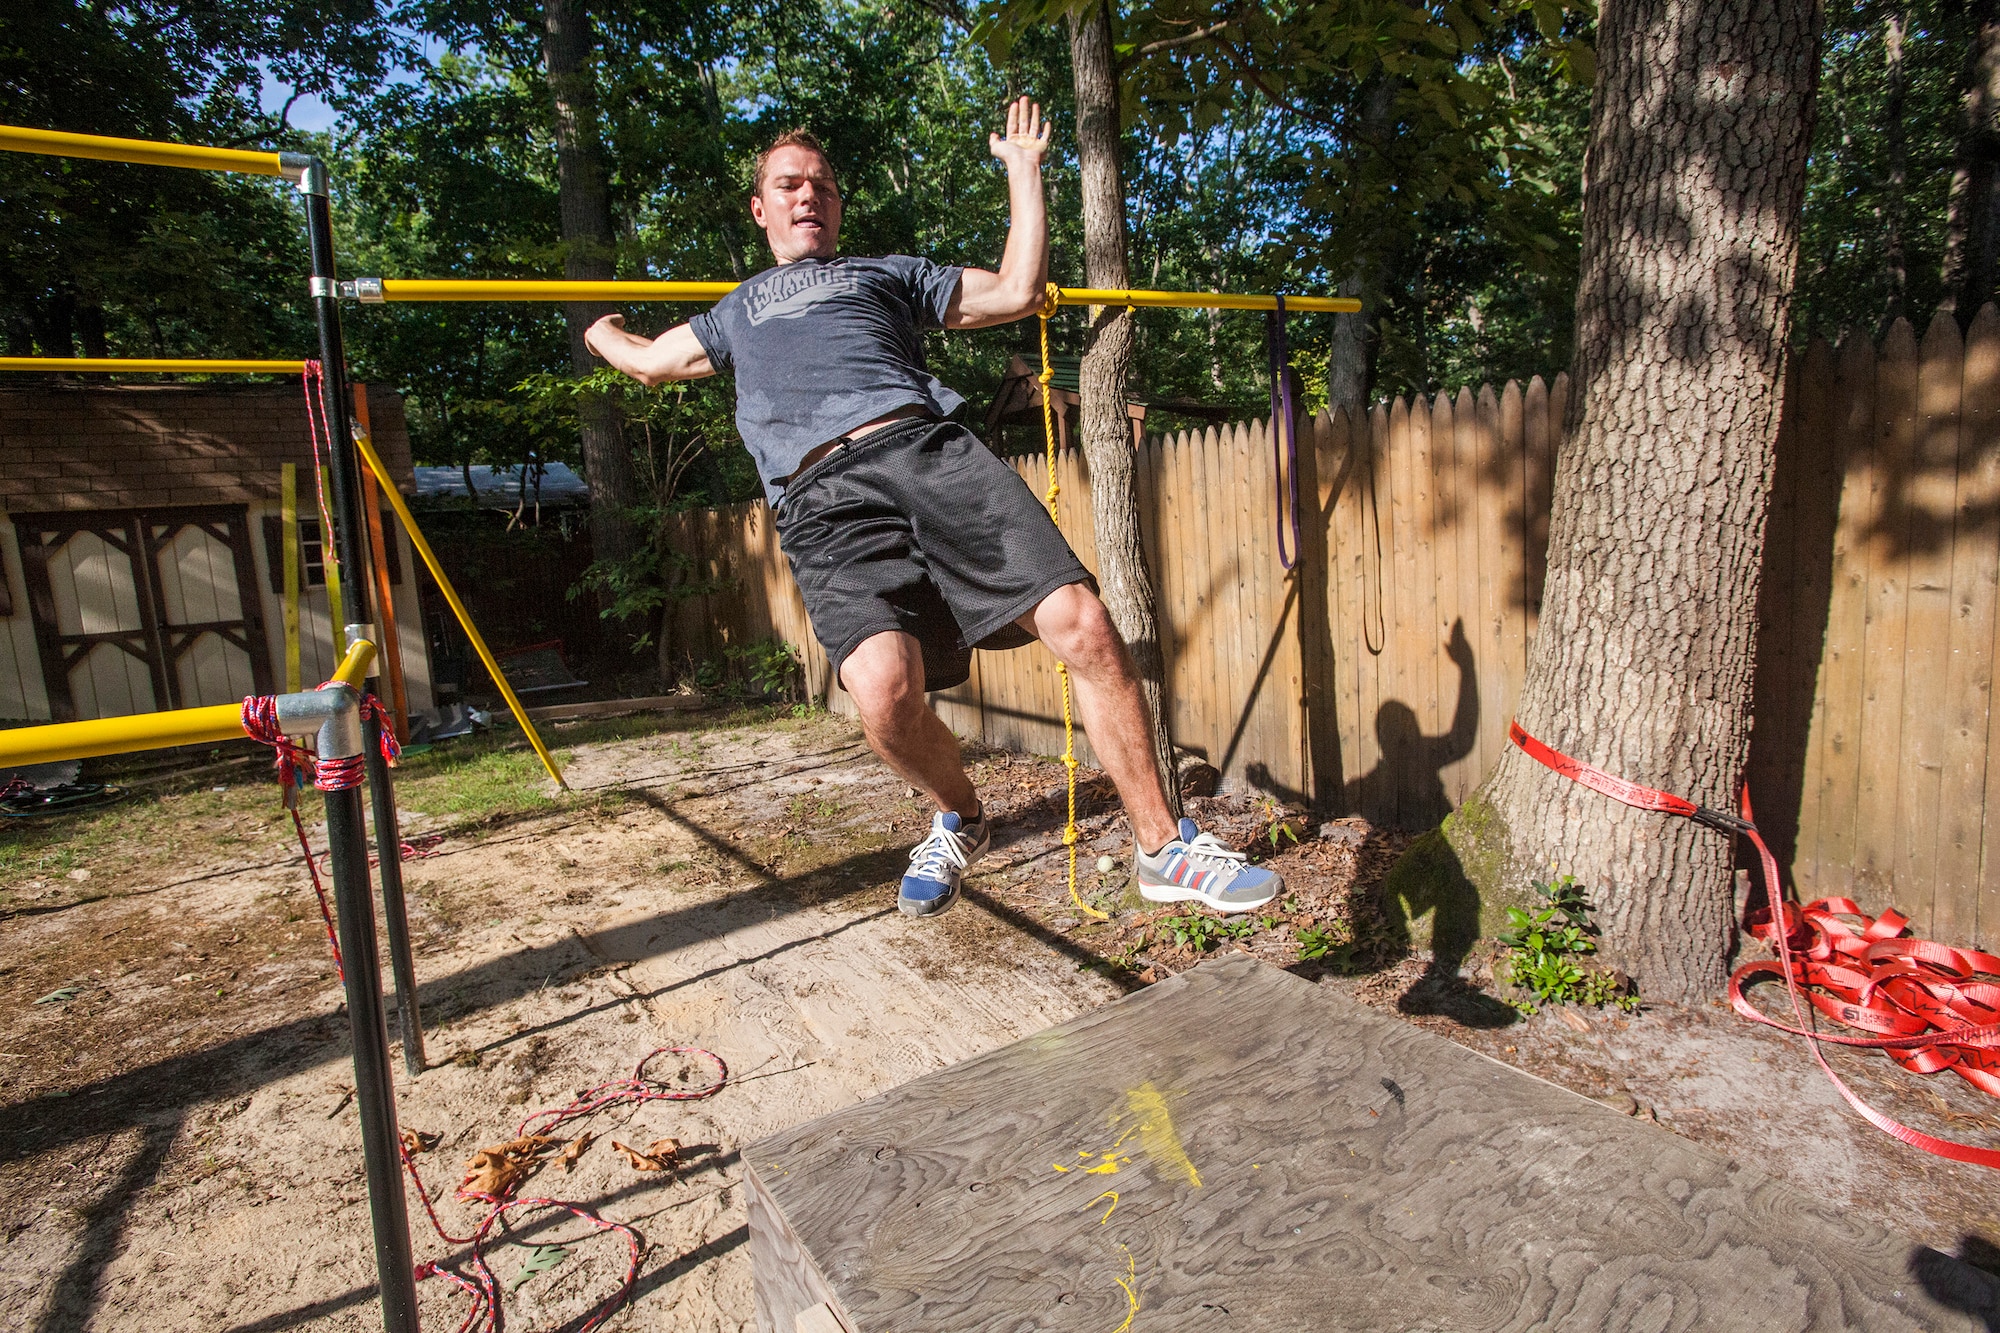 Tech. Sgt. Justin B. Gielski trains to compete on the TV show “American Ninja Warrior” in the backyard of his home in Medford, N.J., Aug. 21, 2015. Gielski placed fifth in the all-military city final on the TV show and advanced to the finals in Las Vegas. Gielski is a loadmaster with the 150th Special Operations Squadron, 108th Wing, New Jersey Air National Guard, located at Joint Base McGuire-Dix-Lakehurst, N.J. (U.S. Air National Guard photo by Master Sgt. Mark C. Olsen/Released)